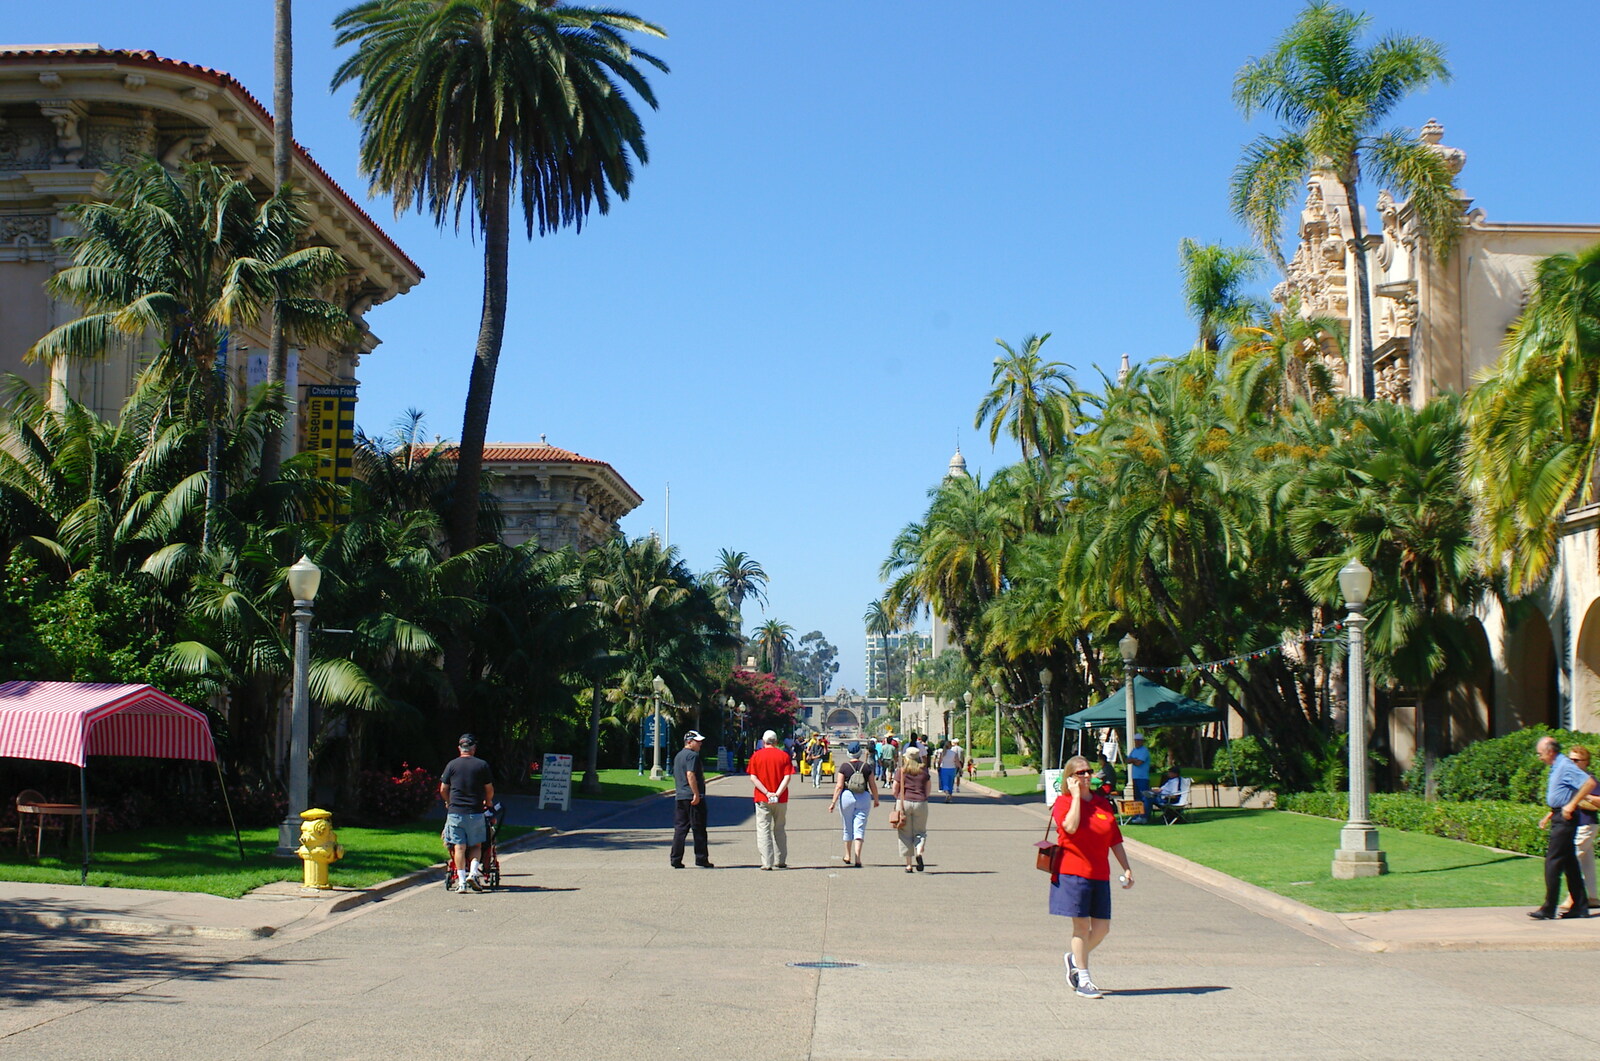 Scenes and People of Balboa Park, San Diego, California - 25th September 2005: A wide avenue